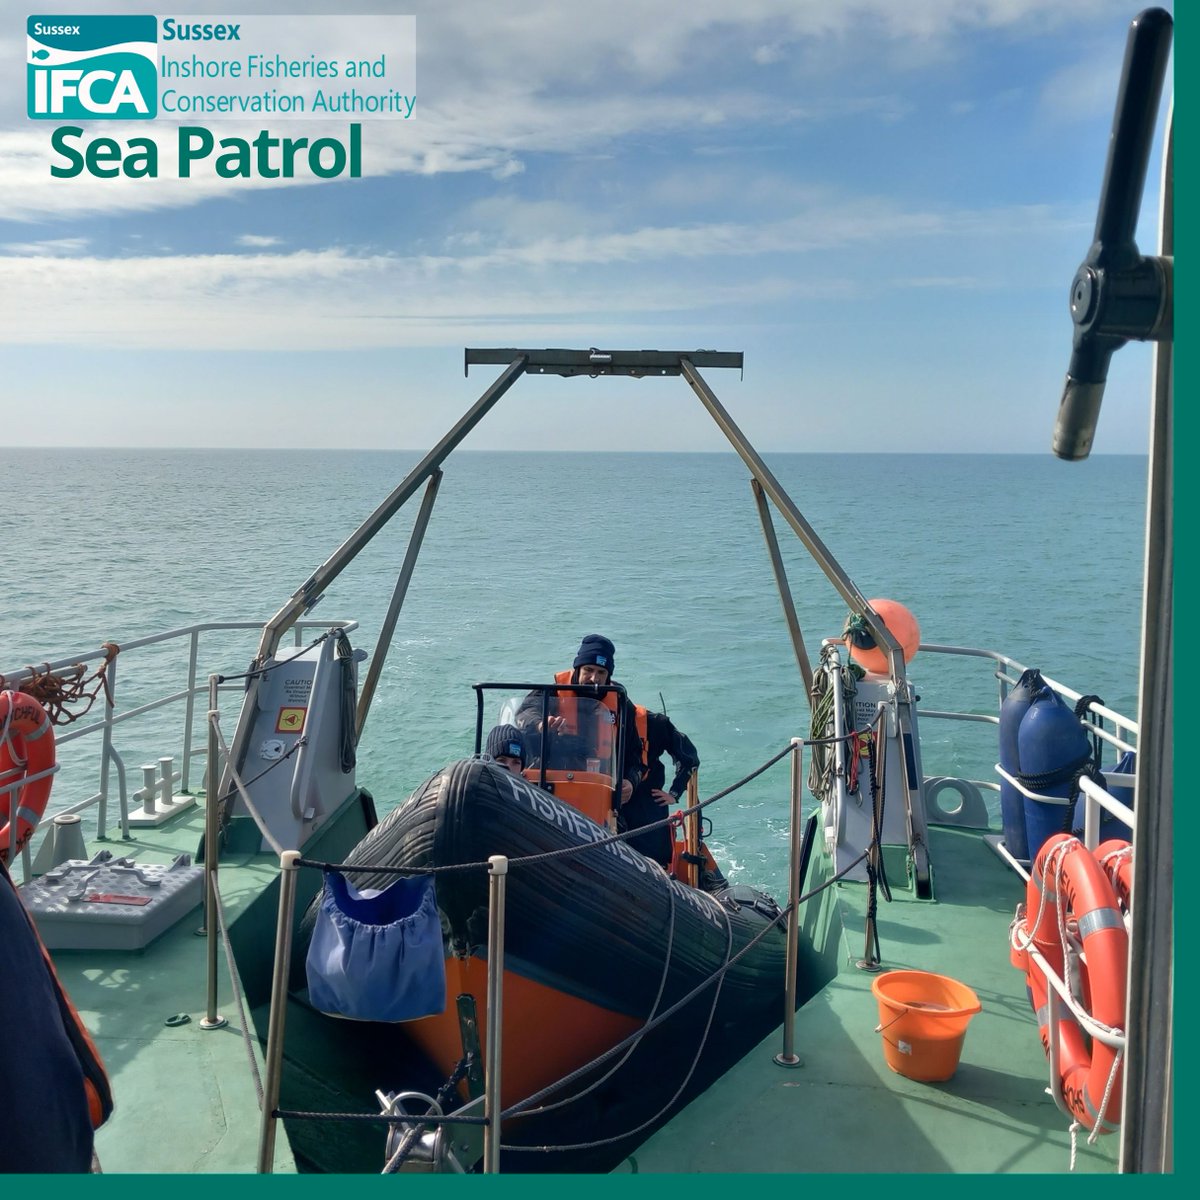 Between the unsettled weather recently, @sussex_ifca Officers have carried out patrols along the coast within our district. Conducting boardings & looking at species, volume + size of the landings, also making sure gear is marked correctly and methods being used are compliant.